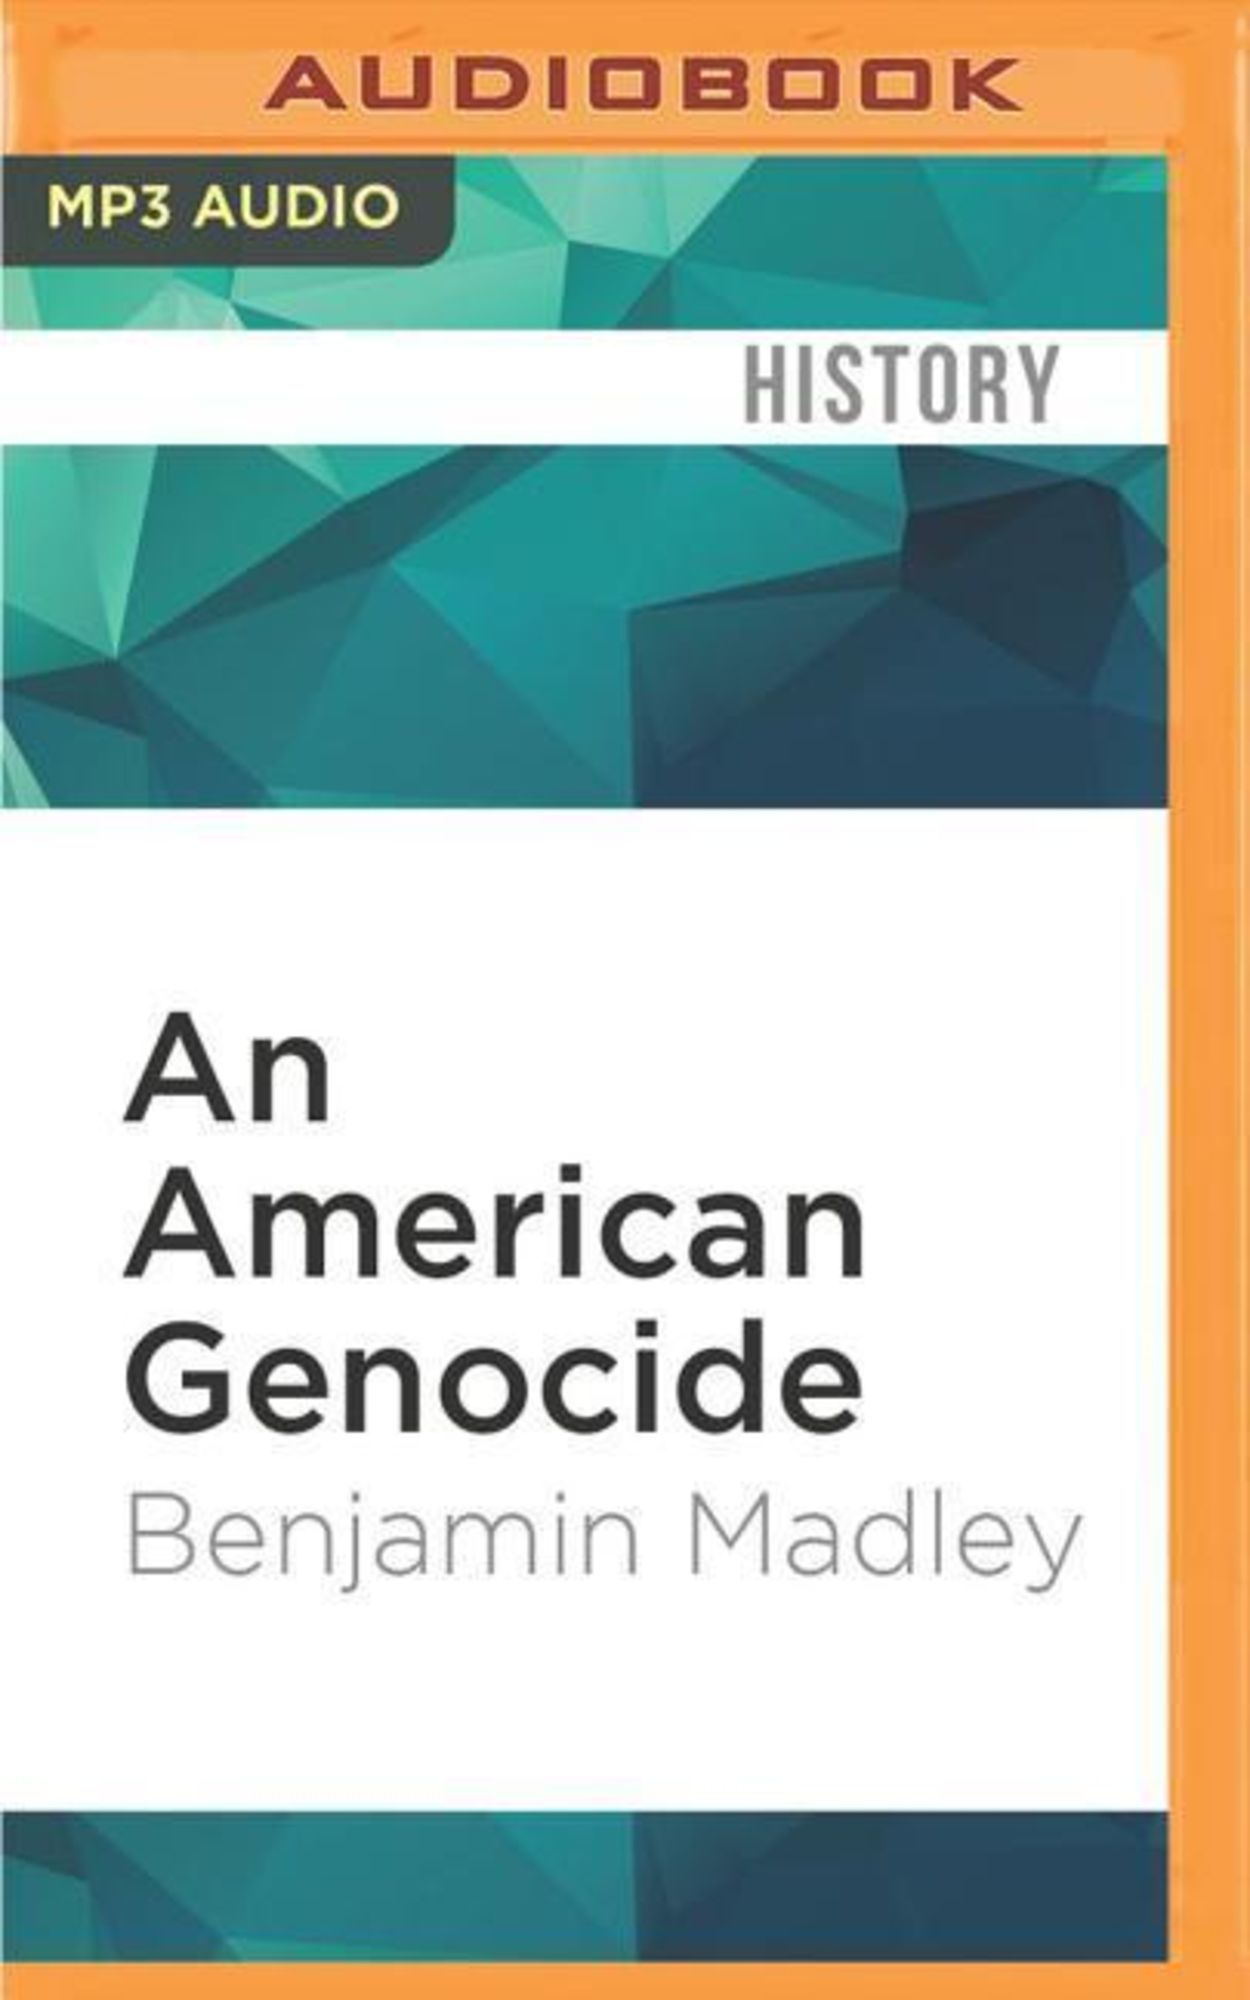 and　Hörbuch　'Benjamin　States　Genocide:　Catastrophe,　the　Indian　von　1846-1873'　The　Madley'　United　California　An　American